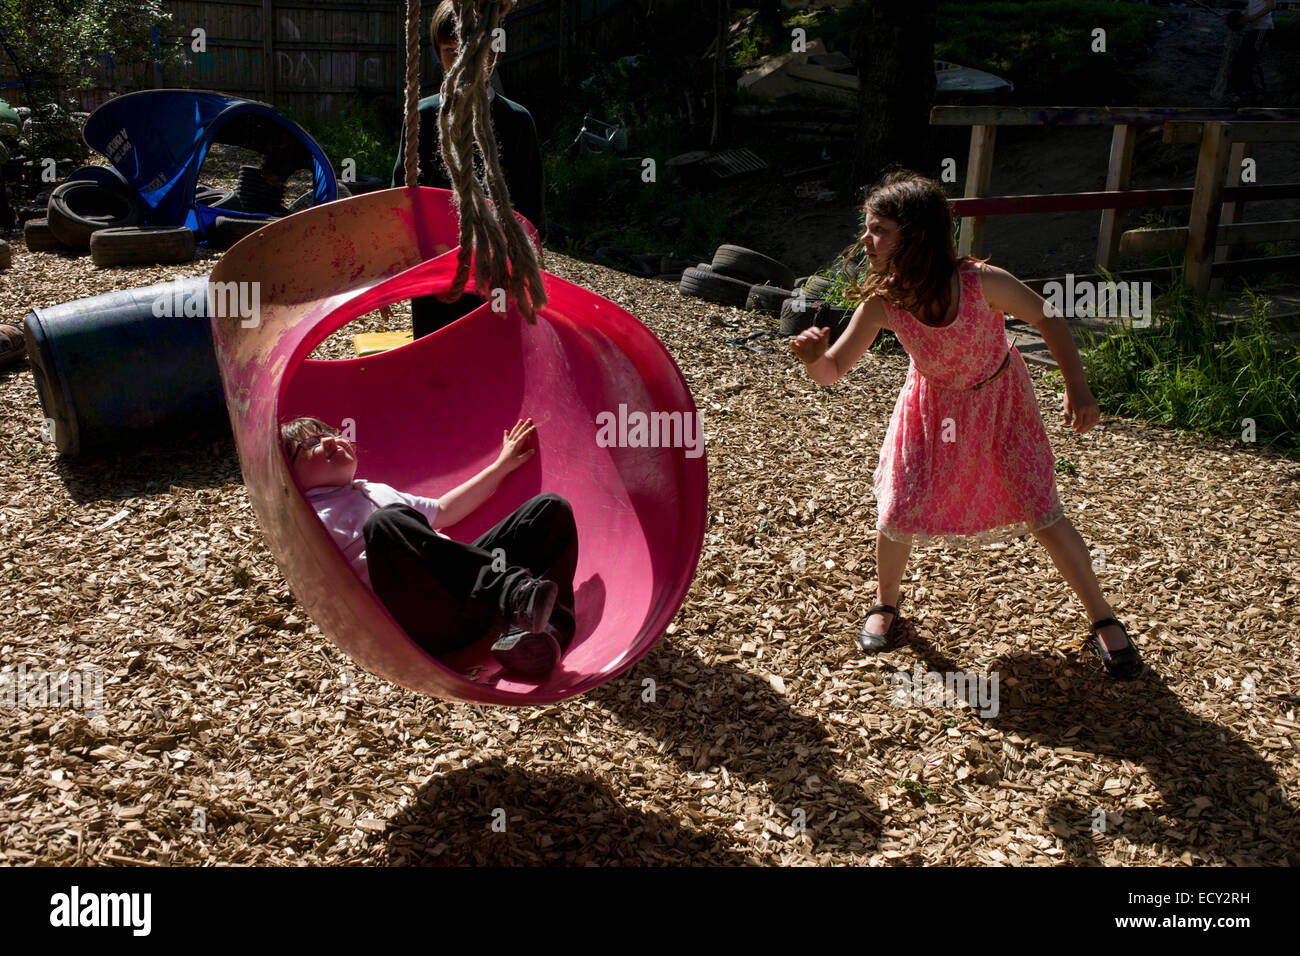 Children play with rope swing in risk averse playground called The Land on Plas Madoc Estate, Ruabon, Wrexham, Wales. Stock Photo